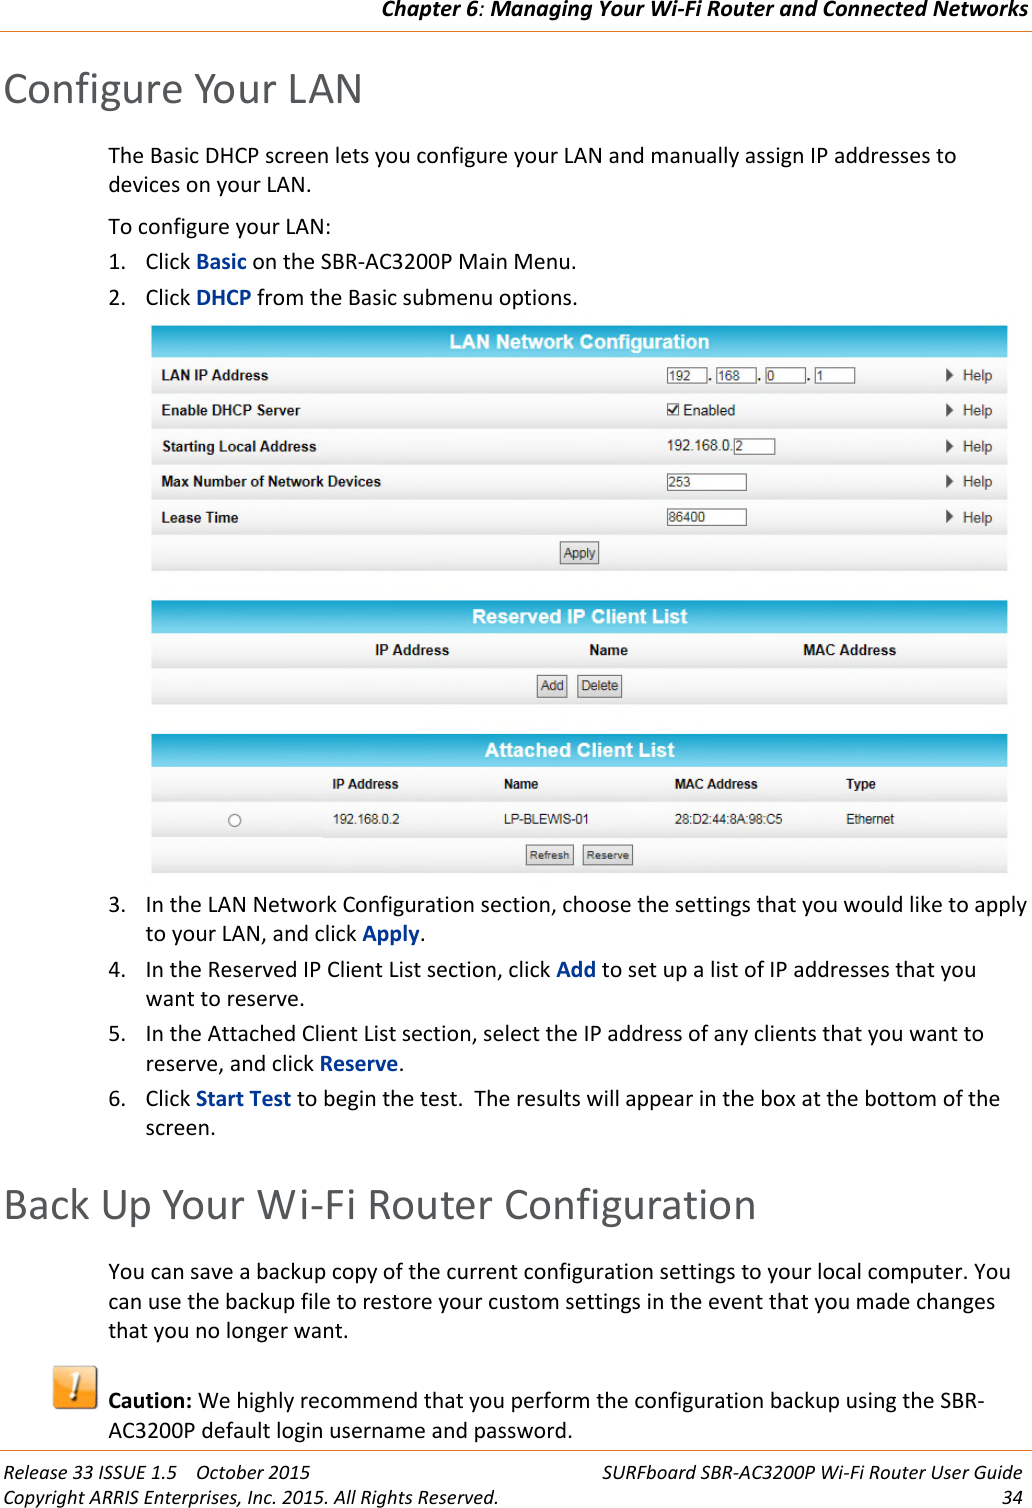 Chapter 6:Managing Your Wi-Fi Router and Connected NetworksRelease 33 ISSUE 1.5 October 2015 SURFboard SBR-AC3200P Wi-Fi Router User GuideCopyright ARRIS Enterprises, Inc. 2015. All Rights Reserved. 34Configure Your LANThe Basic DHCP screen lets you configure your LAN and manually assign IP addresses todevices on your LAN.To configure your LAN:1. Click Basic on the SBR-AC3200P Main Menu.2. Click DHCP from the Basic submenu options.3. In the LAN Network Configuration section, choose the settings that you would like to applyto your LAN, and click Apply.4. In the Reserved IP Client List section, click Add to set up a list of IP addresses that youwant to reserve.5. In the Attached Client List section, select the IP address of any clients that you want toreserve, and click Reserve.6. Click Start Test to begin the test. The results will appear in the box at the bottom of thescreen.Back Up Your Wi-Fi Router ConfigurationYou can save a backup copy of the current configuration settings to your local computer. Youcan use the backup file to restore your custom settings in the event that you made changesthat you no longer want.Caution: We highly recommend that you perform the configuration backup using the SBR-AC3200P default login username and password.